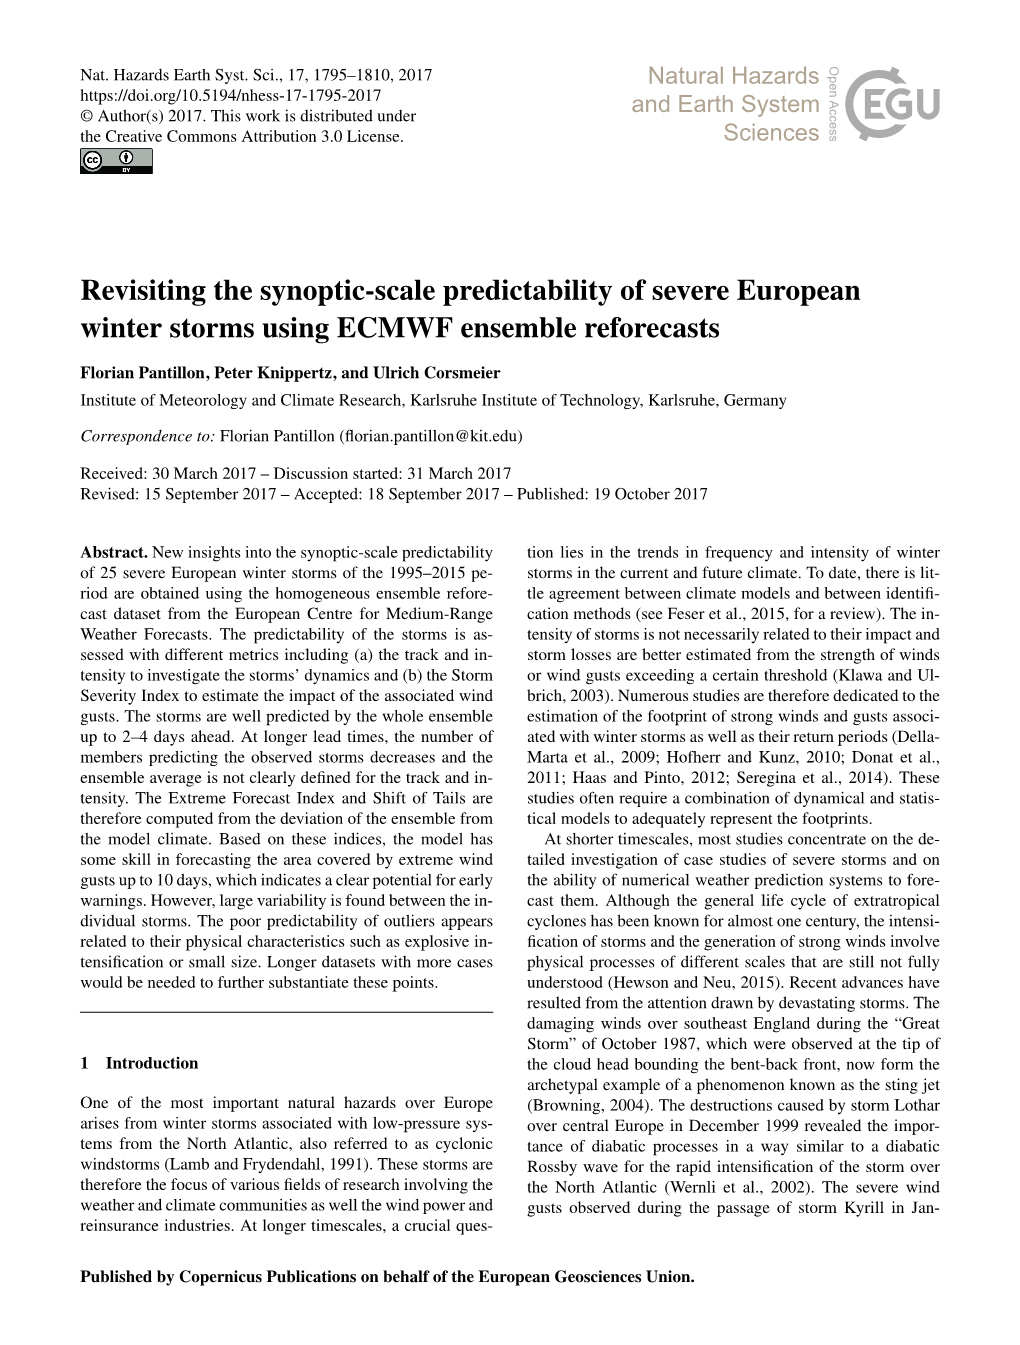 Revisiting the Synoptic-Scale Predictability of Severe European Winter Storms Using ECMWF Ensemble Reforecasts